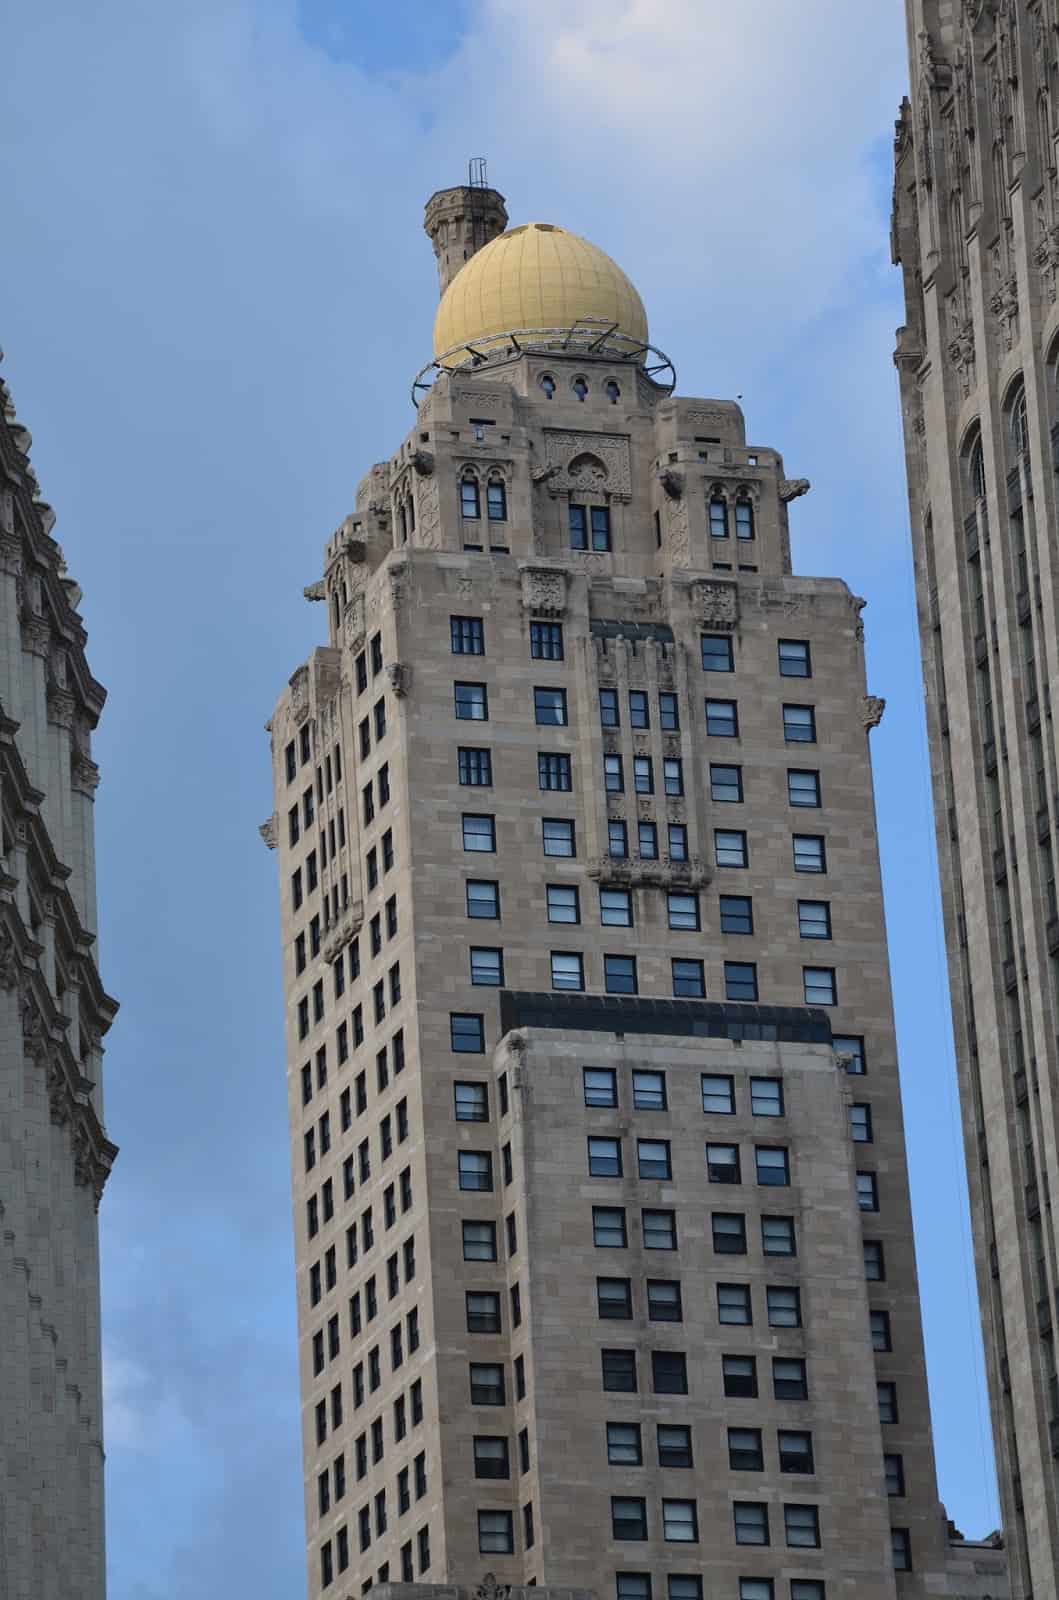 Hotel InterContinental on the Magnificent Mile in Chicago